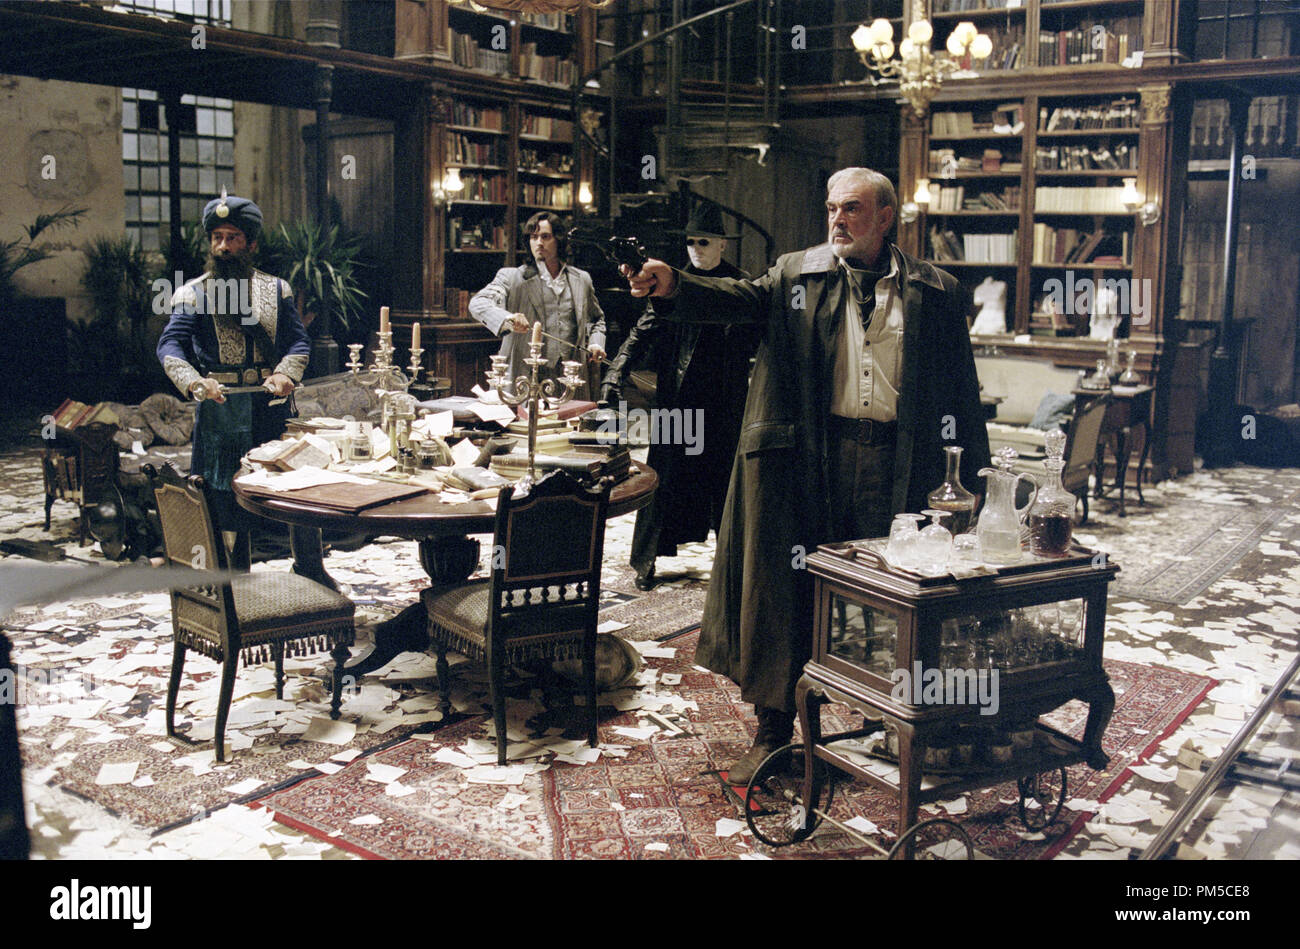 Film Still / Publicity Still from 'The League of Extraordinary Gentlemen' Staurt Townsend, Naseeruddin SHah, Sean Connery, Tony Curran © 2003 20th Century Fox  File Reference # 30753020THA  For Editorial Use Only -  All Rights Reserved Stock Photo